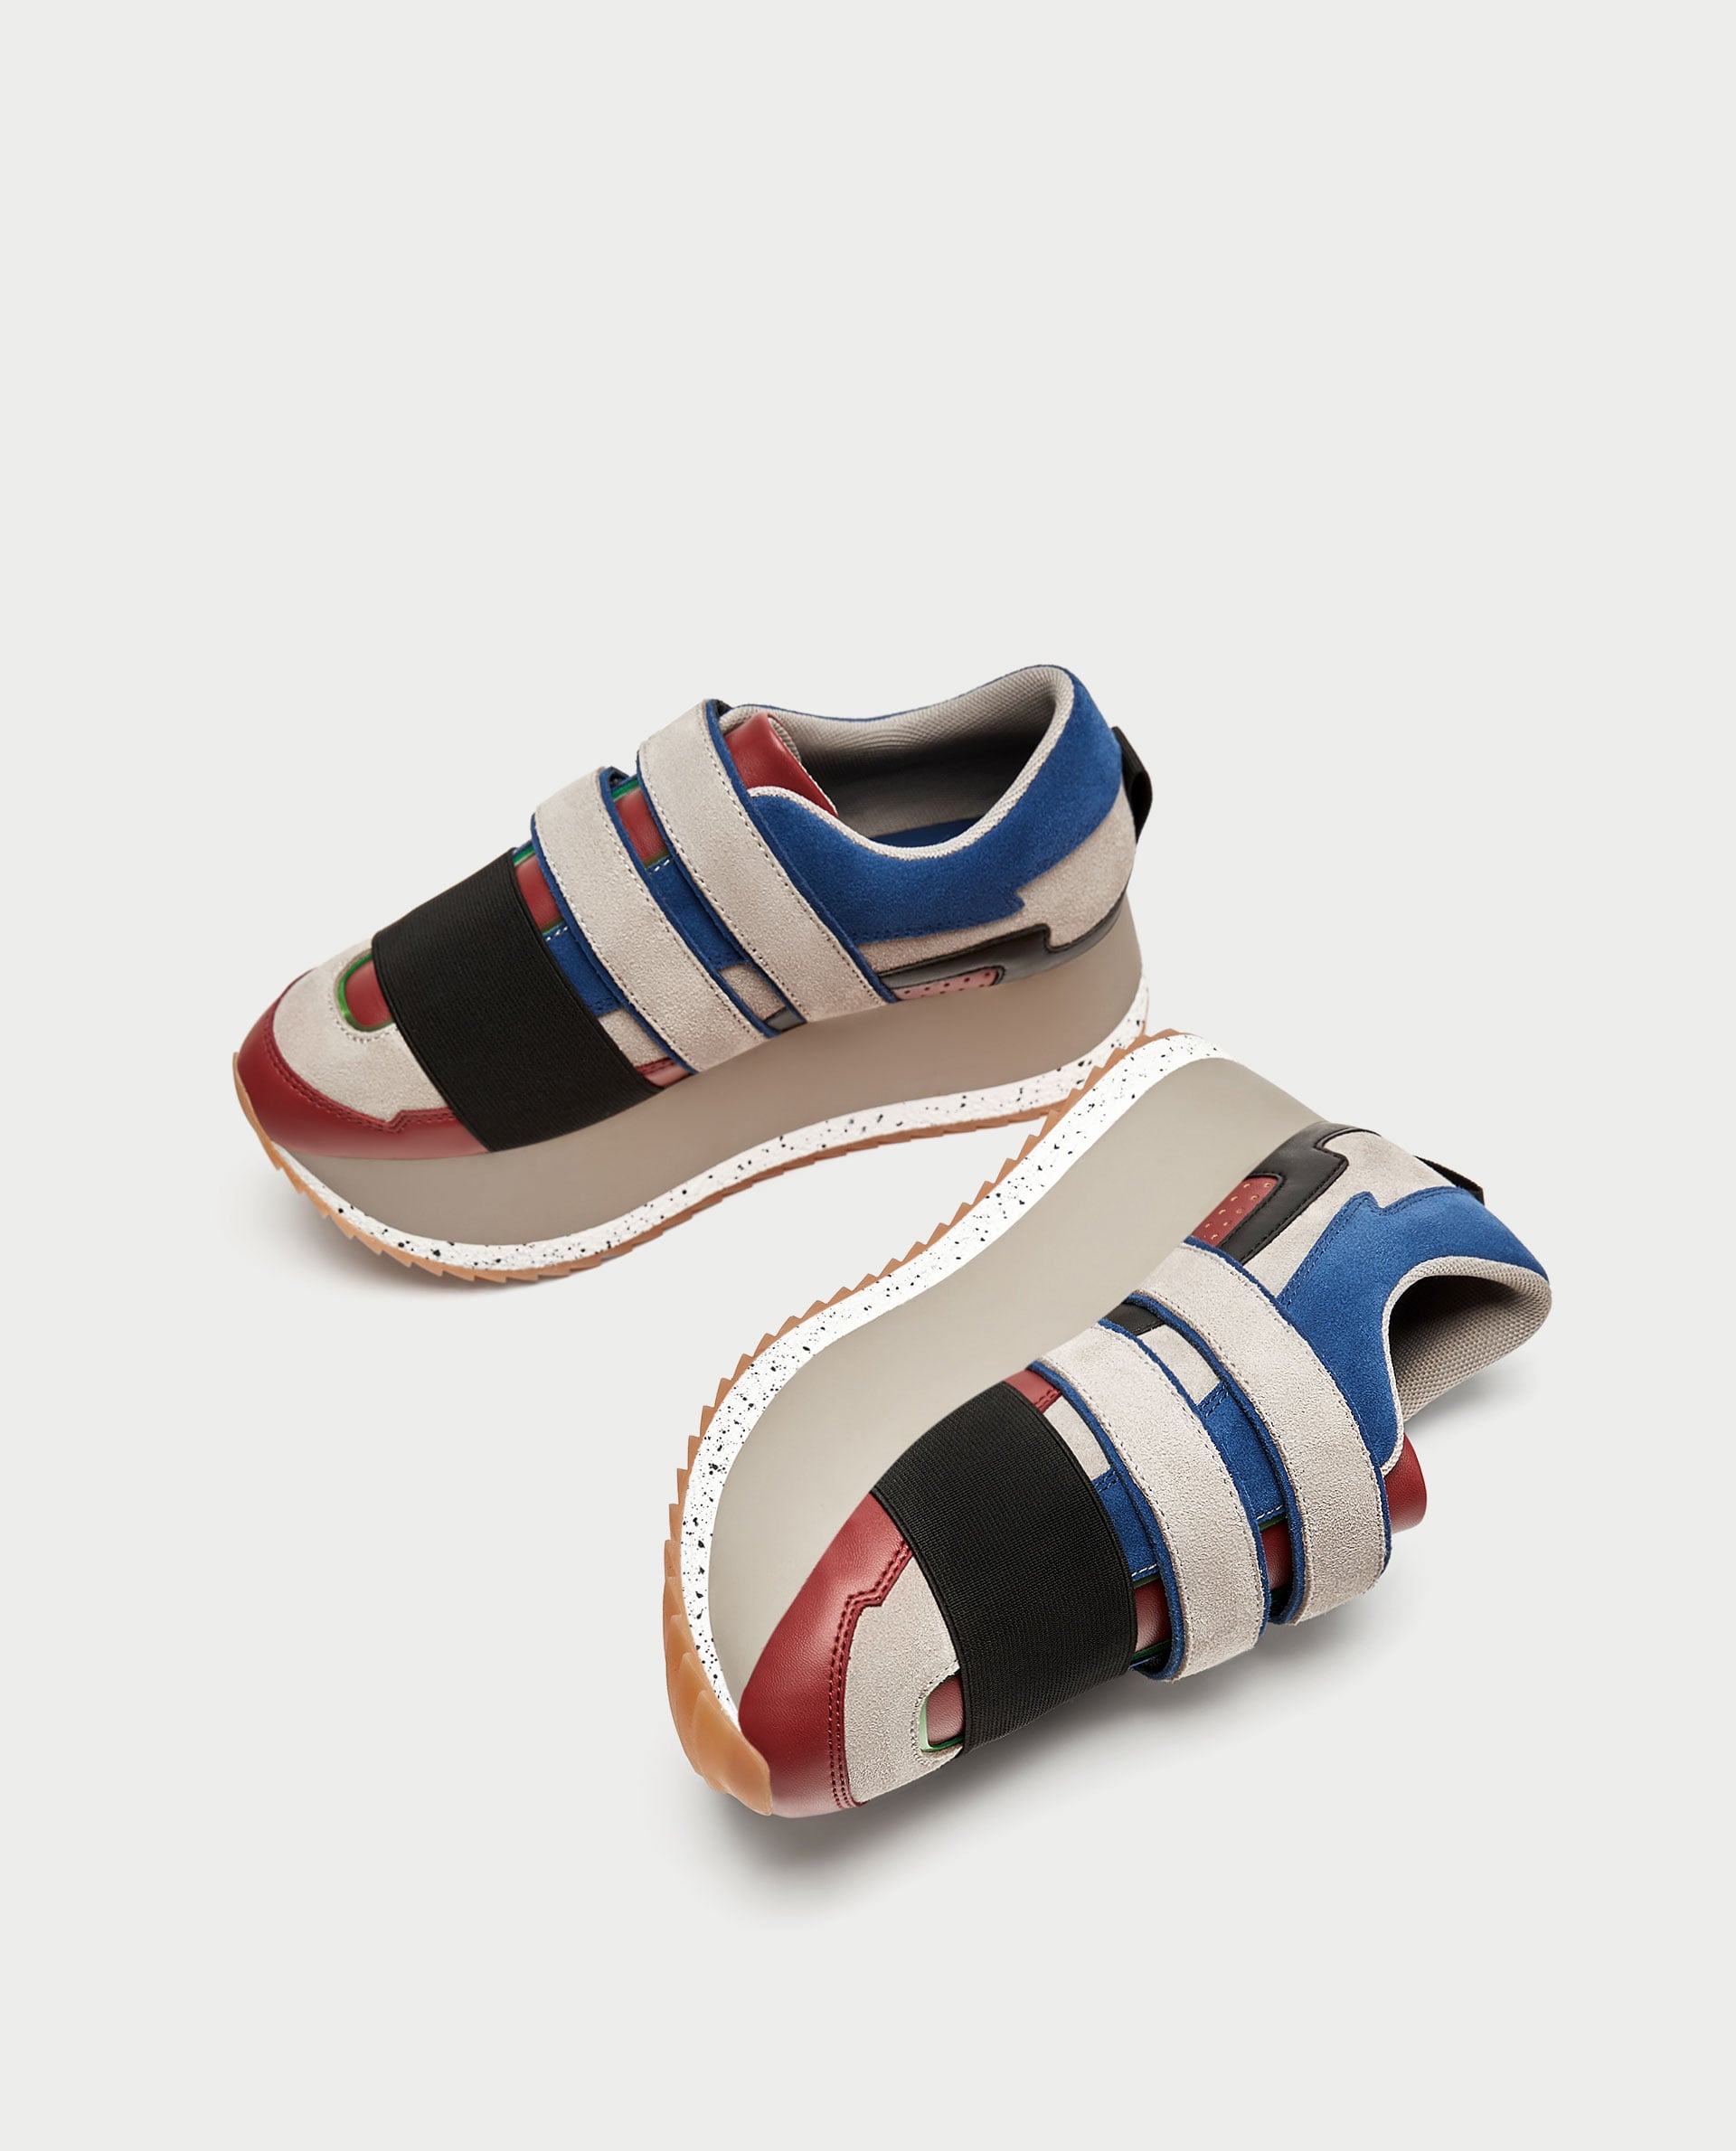 Zara Multicolored Platform Sneakers Tracee Ellis Ross's Men's Sneakers Are Awesome Sold Everywhere | POPSUGAR Fashion Photo 11